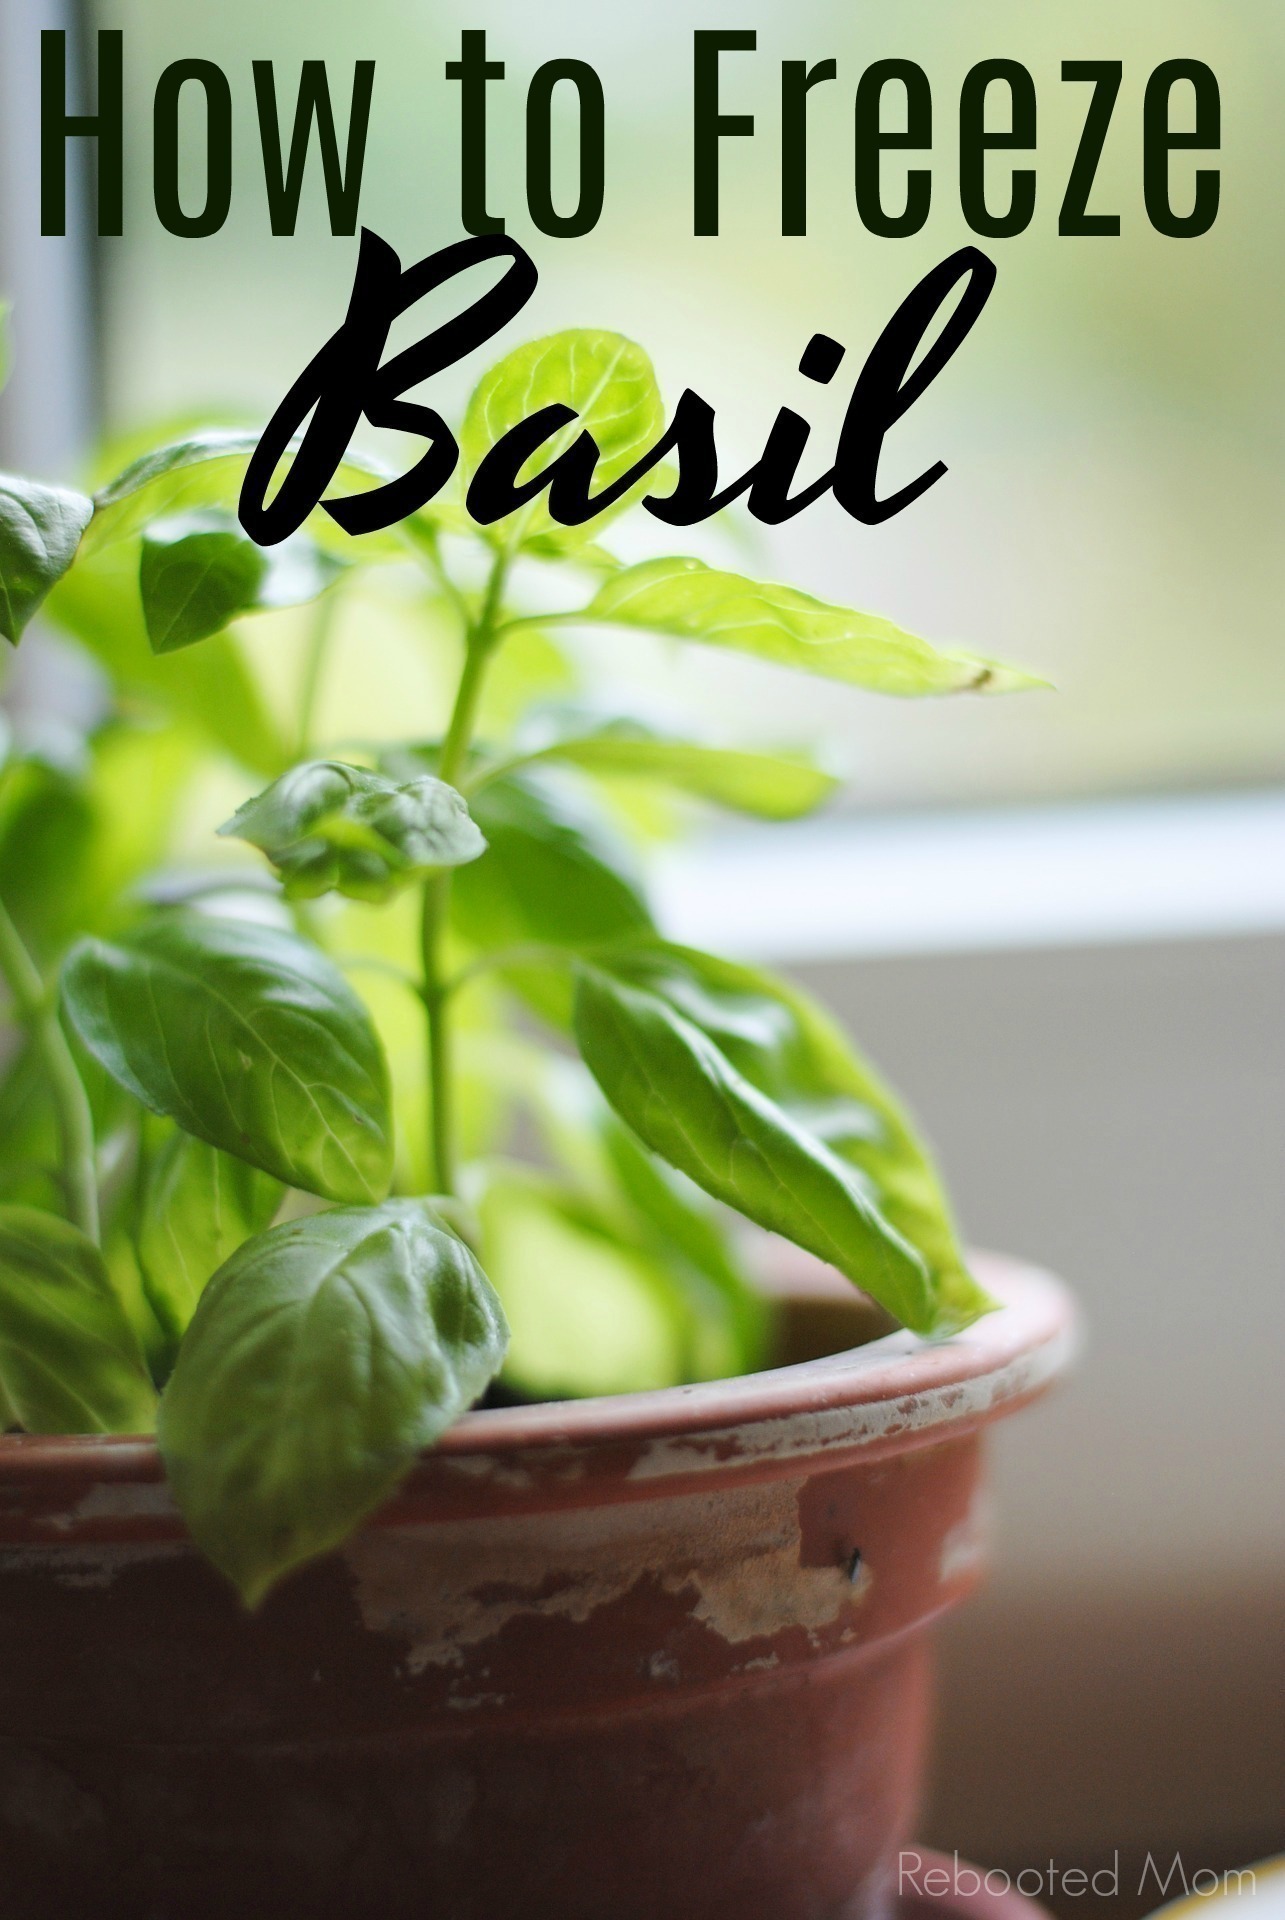 Basil is one of the easiest herbs to grow and amazing to use all year long. Find out how to freeze basil to use all year long.